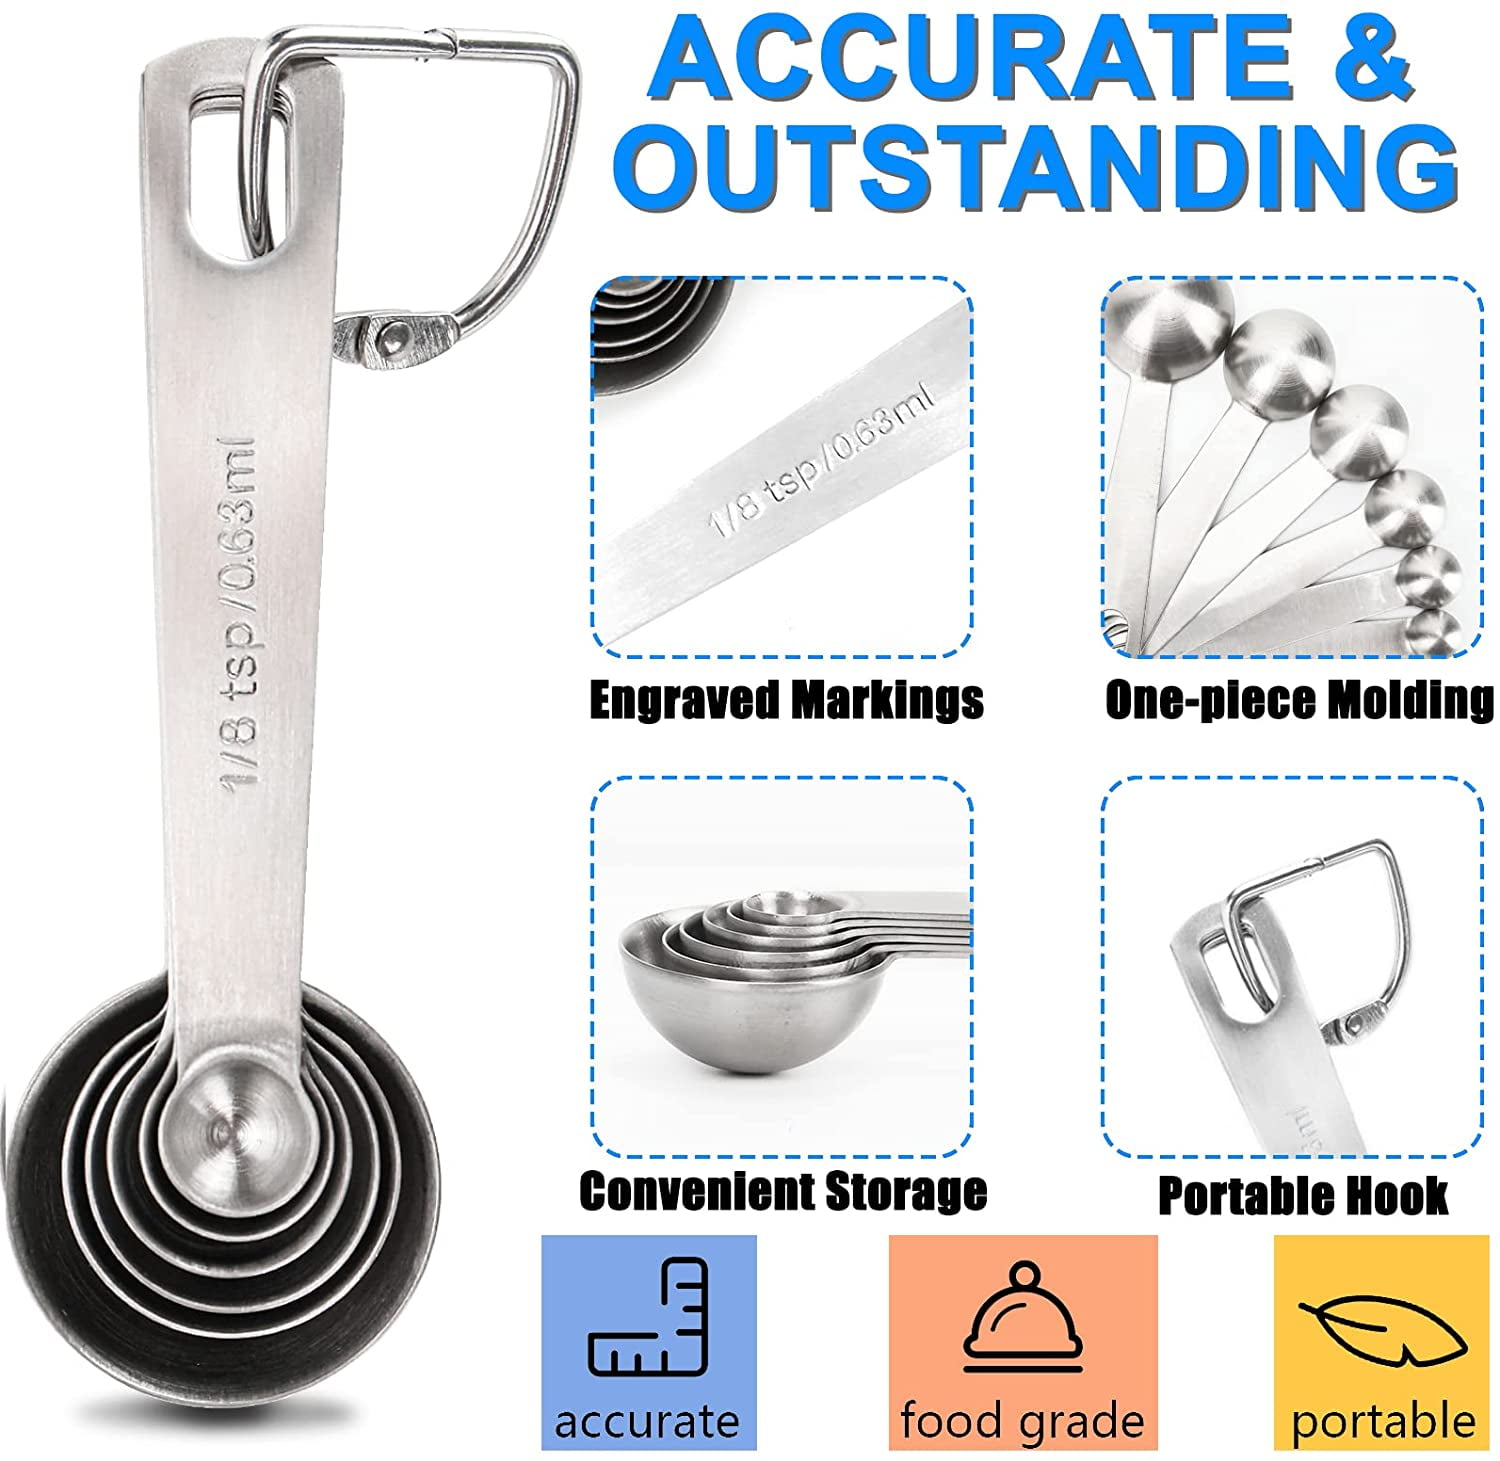  Viwehots Measuring Cups and Spoons Set of 11, 18/8 Stainless  Steel 5 Measure Cups and 6 Measurement Spoons for Kitchen and Baking Measuring  Spoons Set: Home & Kitchen